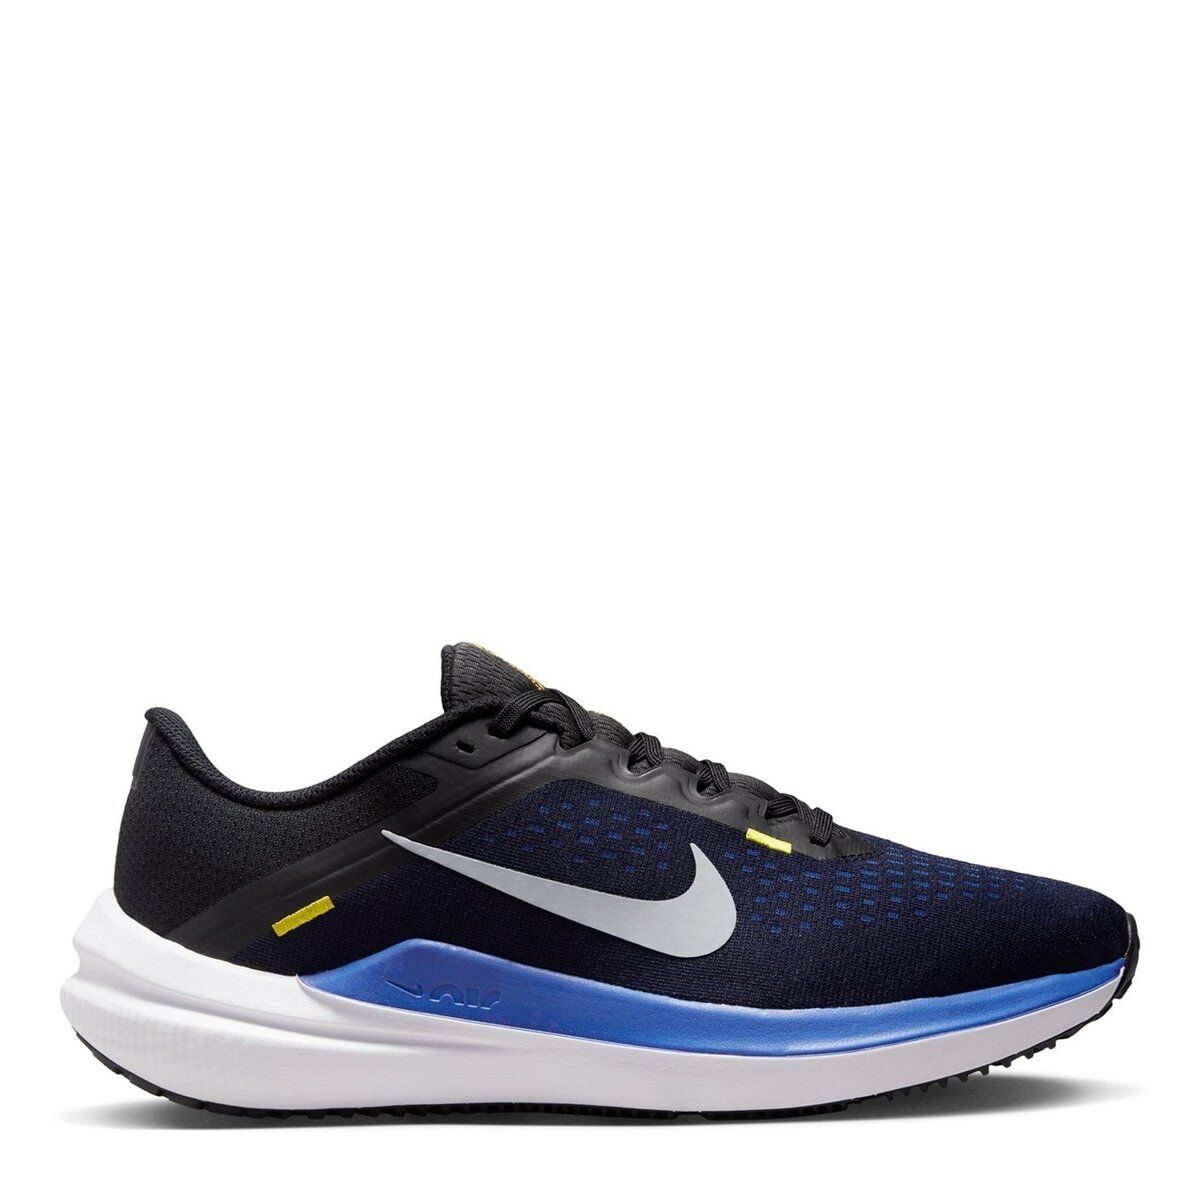 Nike Air Winflo 10 Mens Road Running Shoes - male - Black/Blue - 8.5